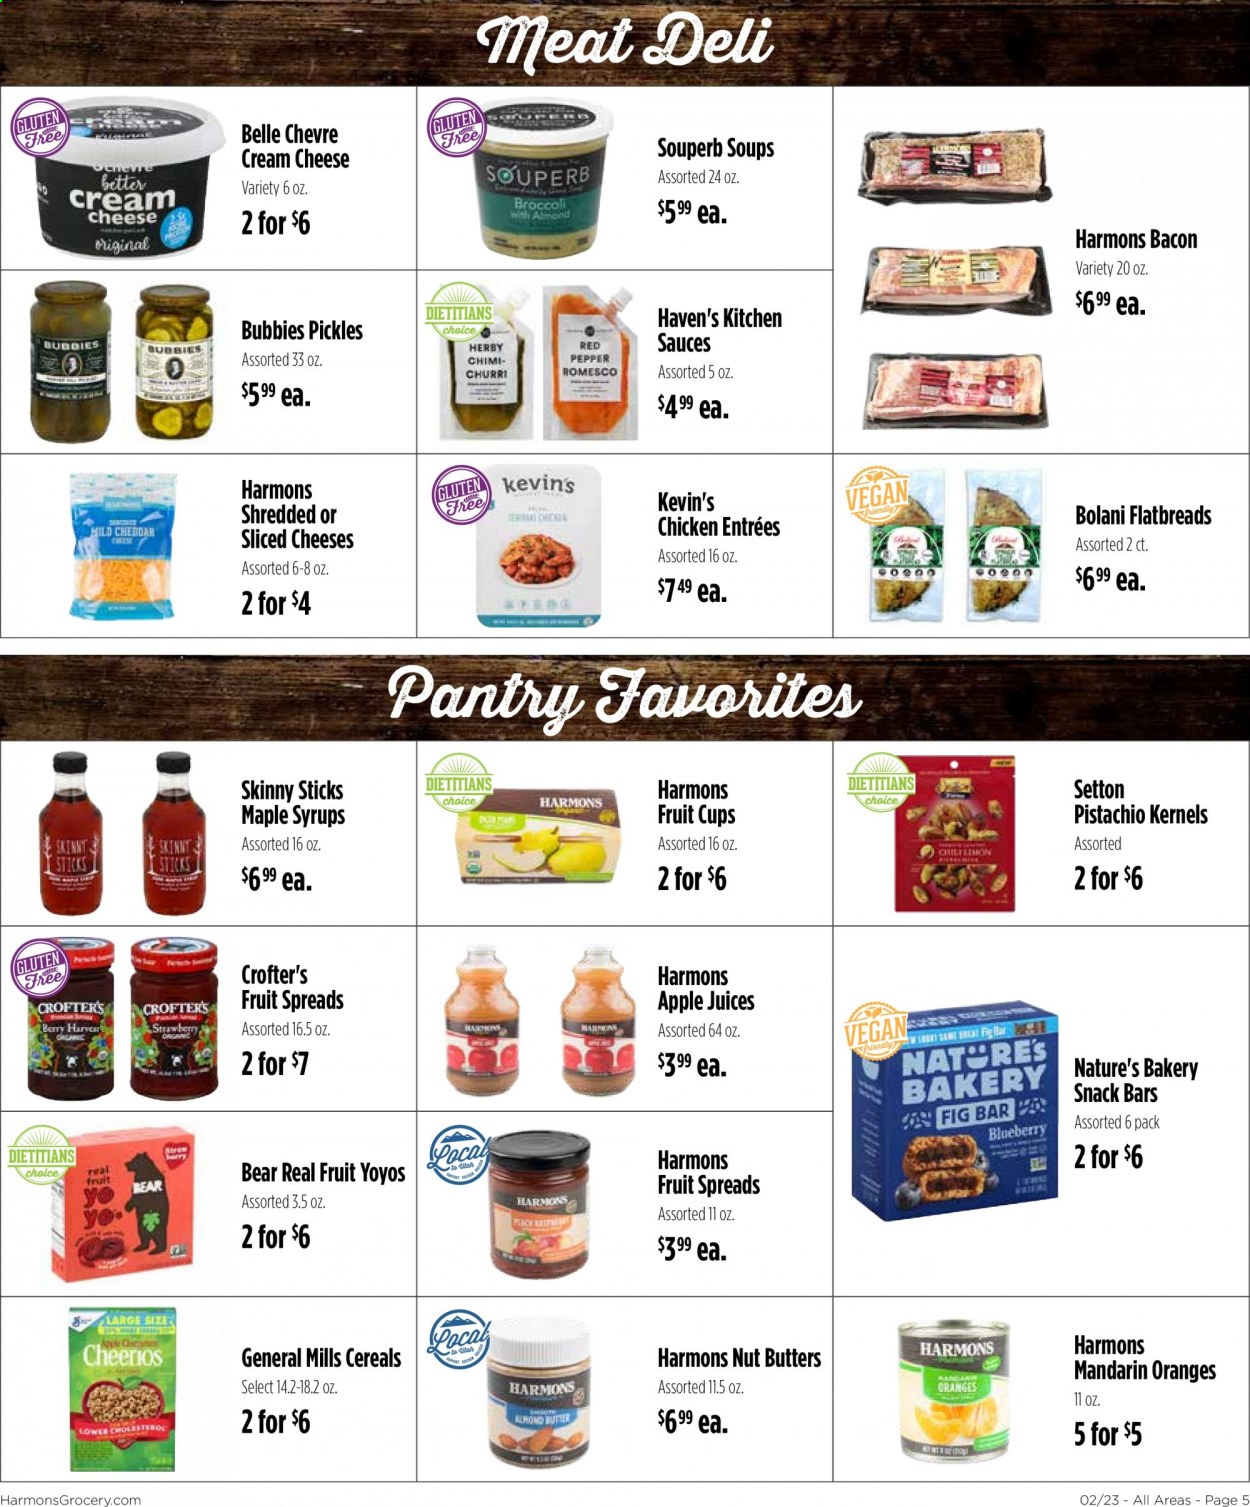 thumbnail - Harmons Flyer - 02/23/2021 - 03/01/2021 - Sales products - pickles, fruit cup, oranges, cream cheese, bacon, sliced cheese, cheese, snack bar, snack, mandarines, cereals, pistachios, juice. Page 5.